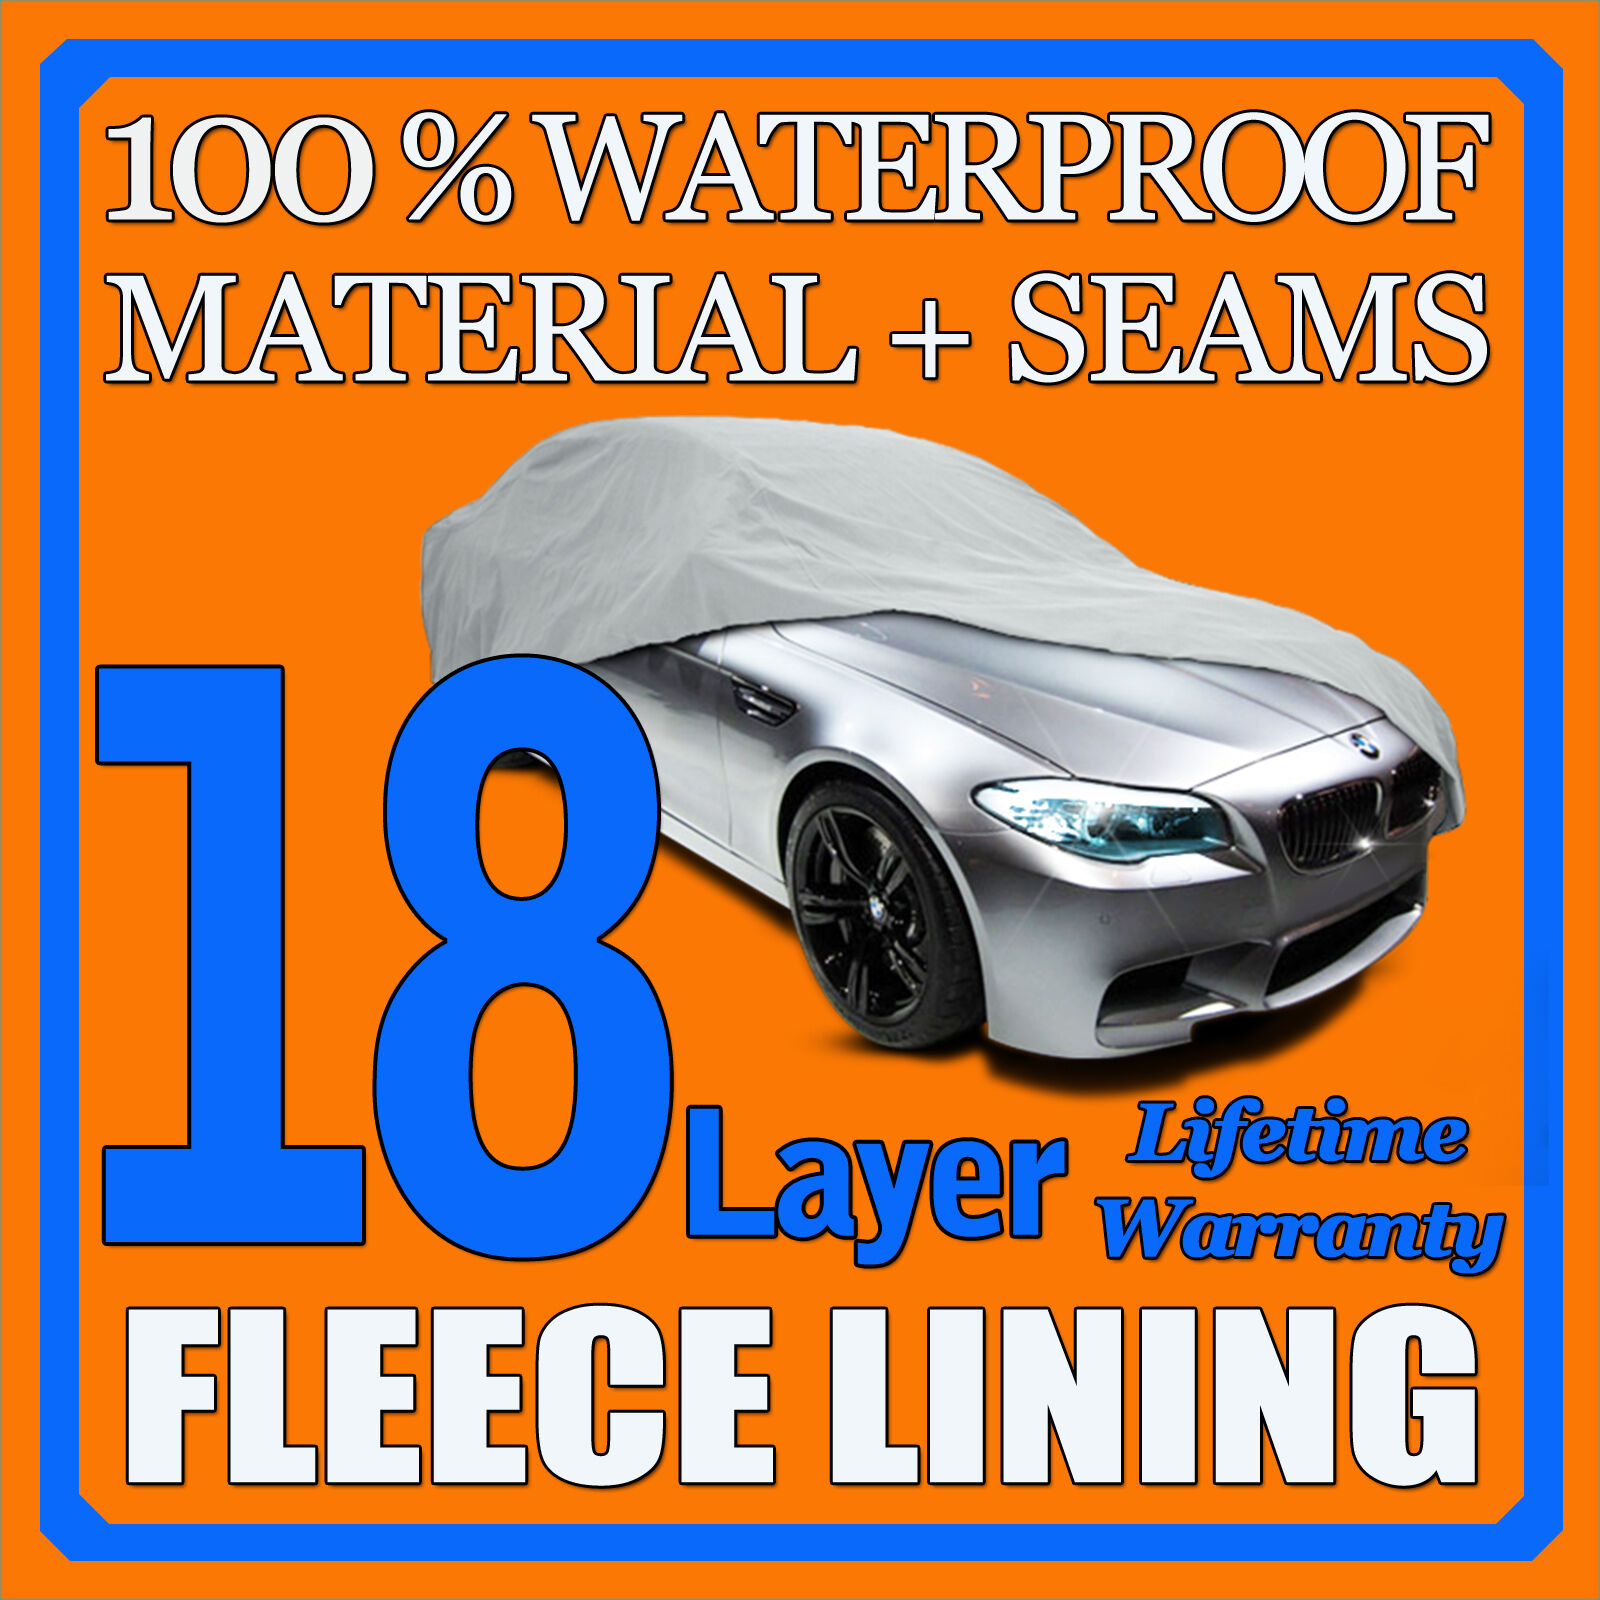 18-LAYER CAR COVER - Protect Your Car from High Exposure Area of Sun &/or Snow D